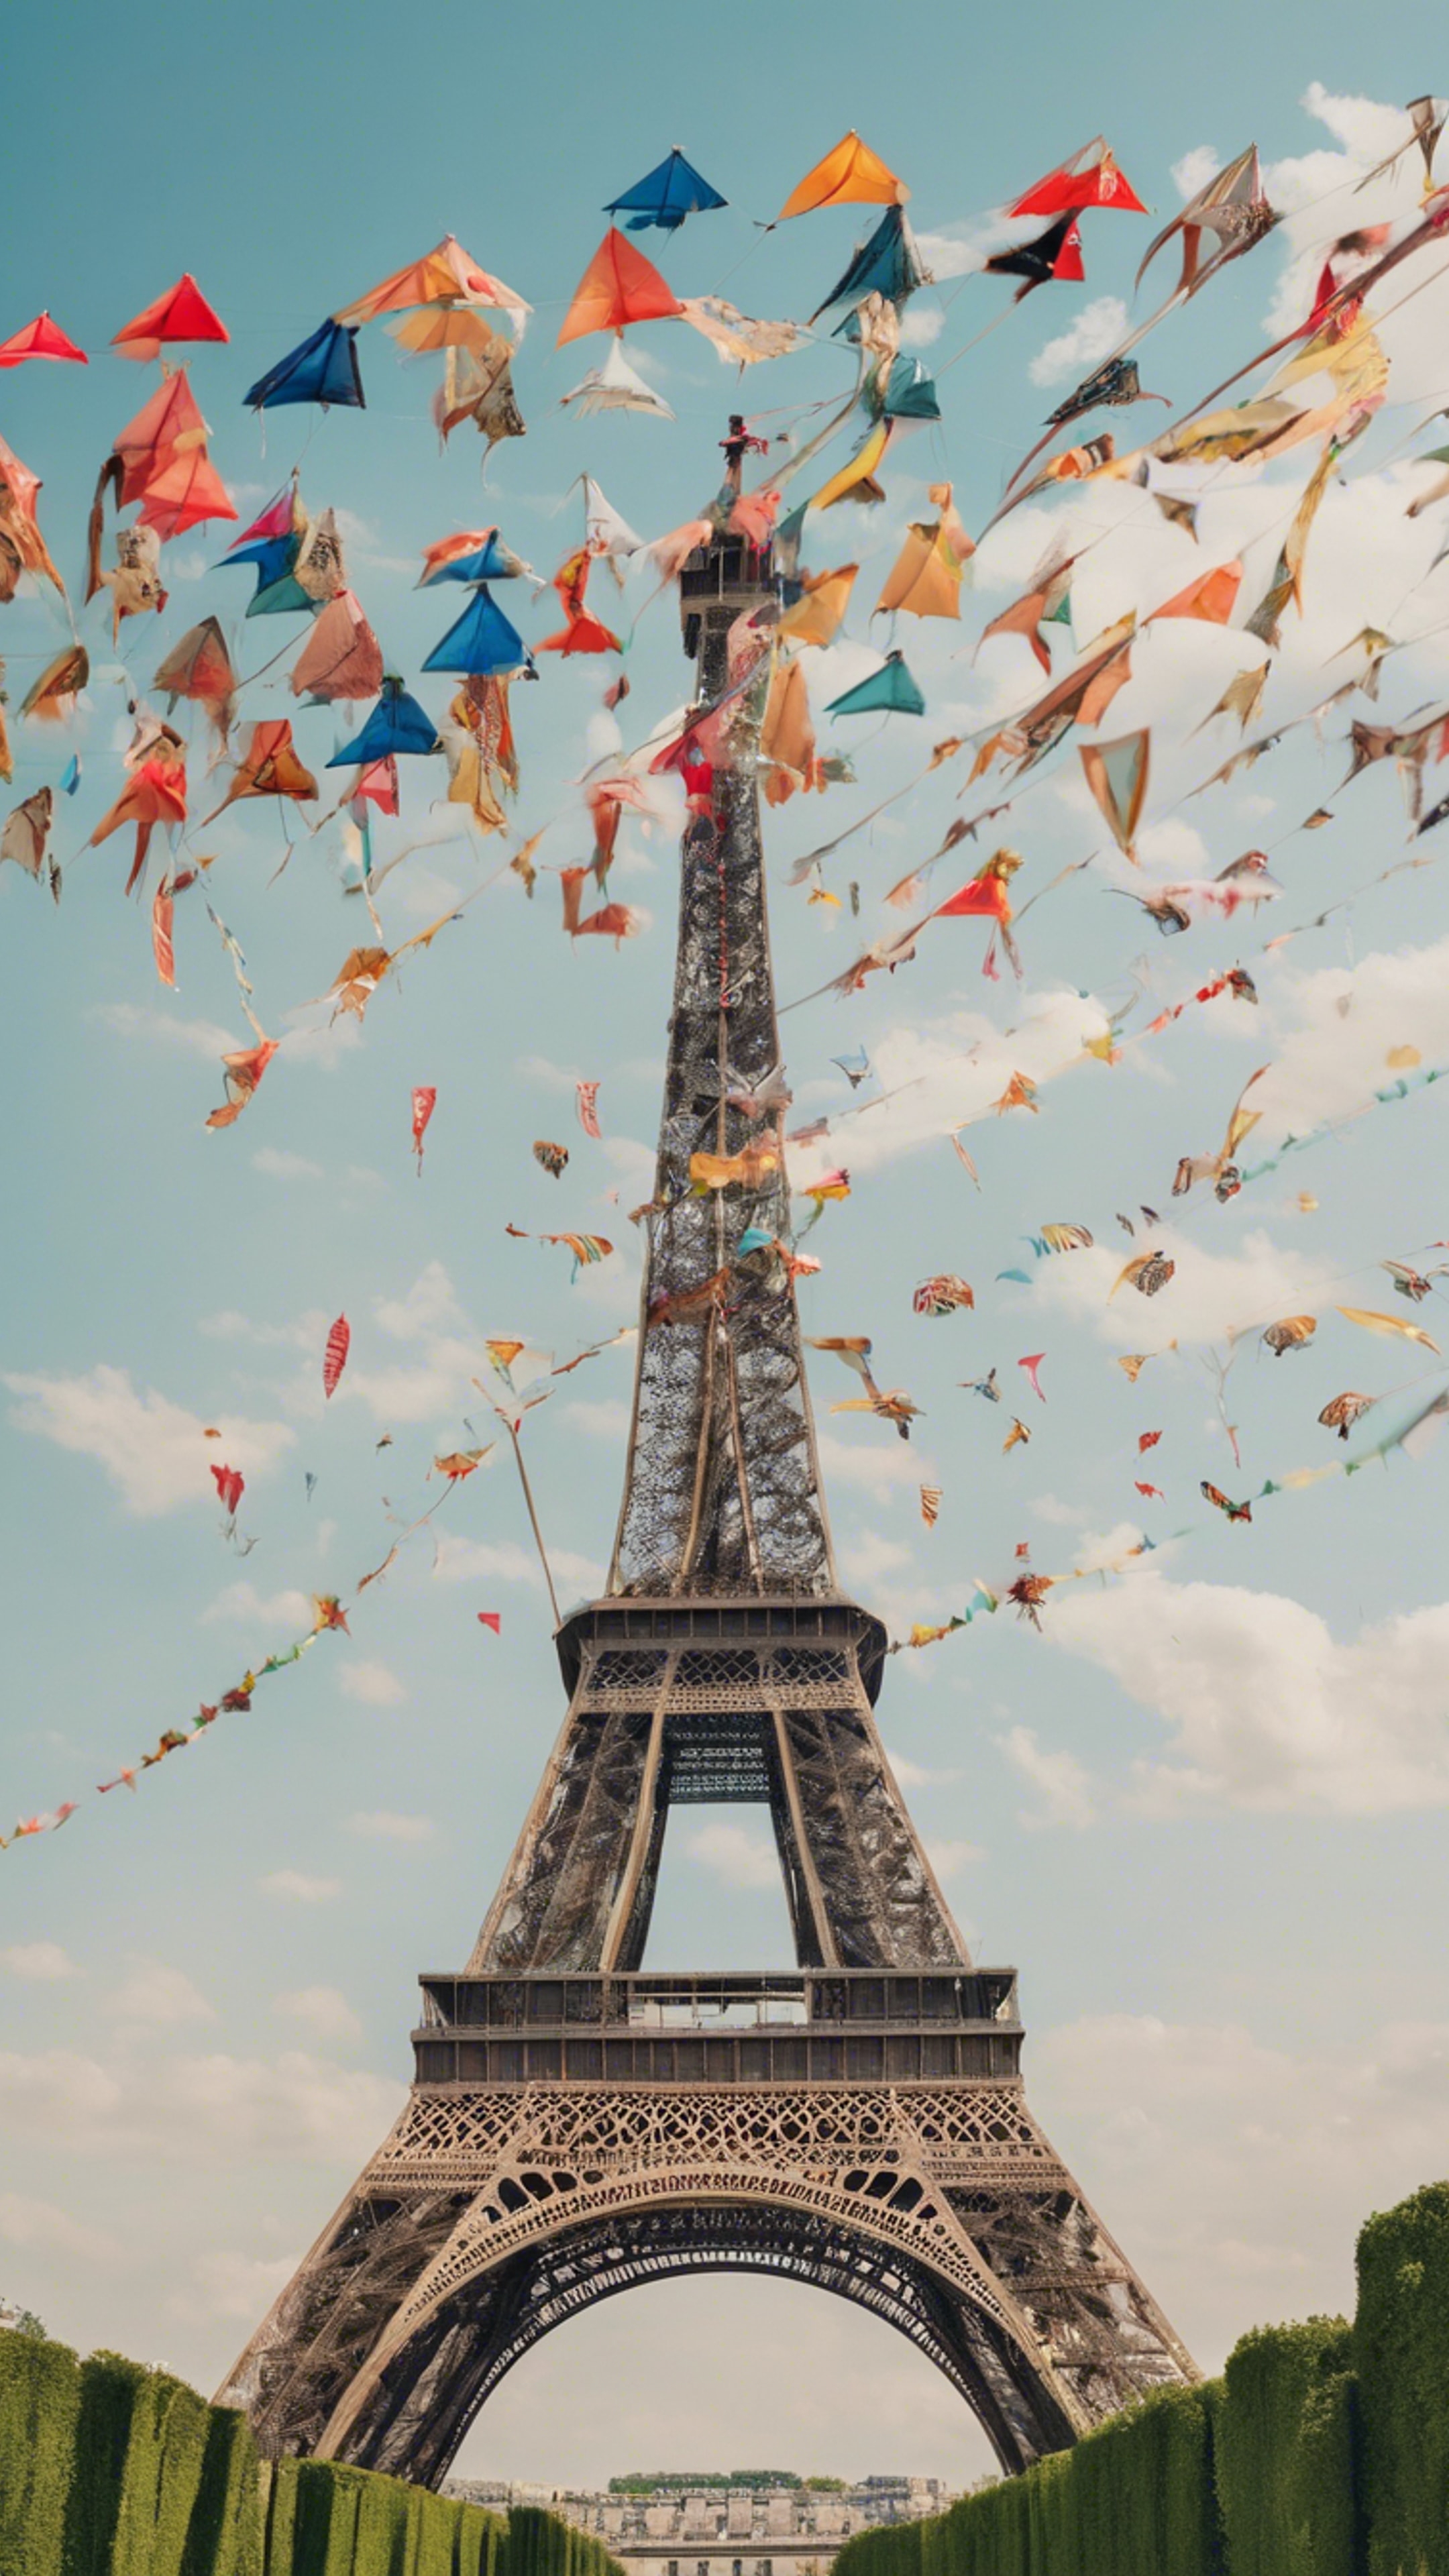 Numerous colorful kites flying around the Eiffel Tower on a breezy summer day. Sfondo[13c5a5af918a46f7995e]